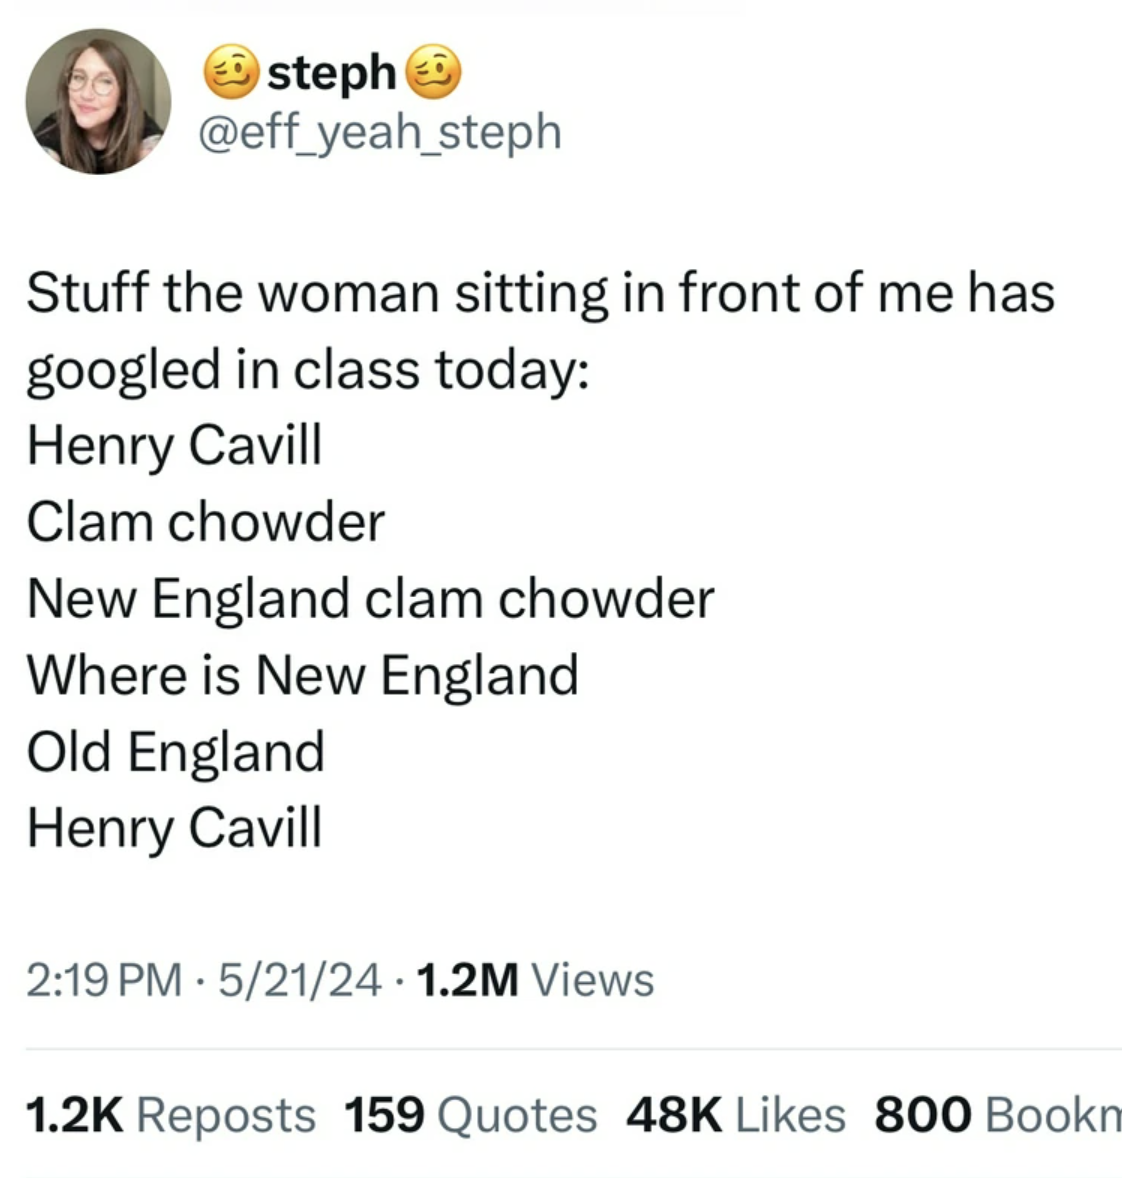 screenshot - steph Stuff the woman sitting in front of me has googled in class today Henry Cavill Clam chowder New England clam chowder Where is New England Old England Henry Cavill 52124 1.2M Views Reposts 159 Quotes 48K 800 Bookm